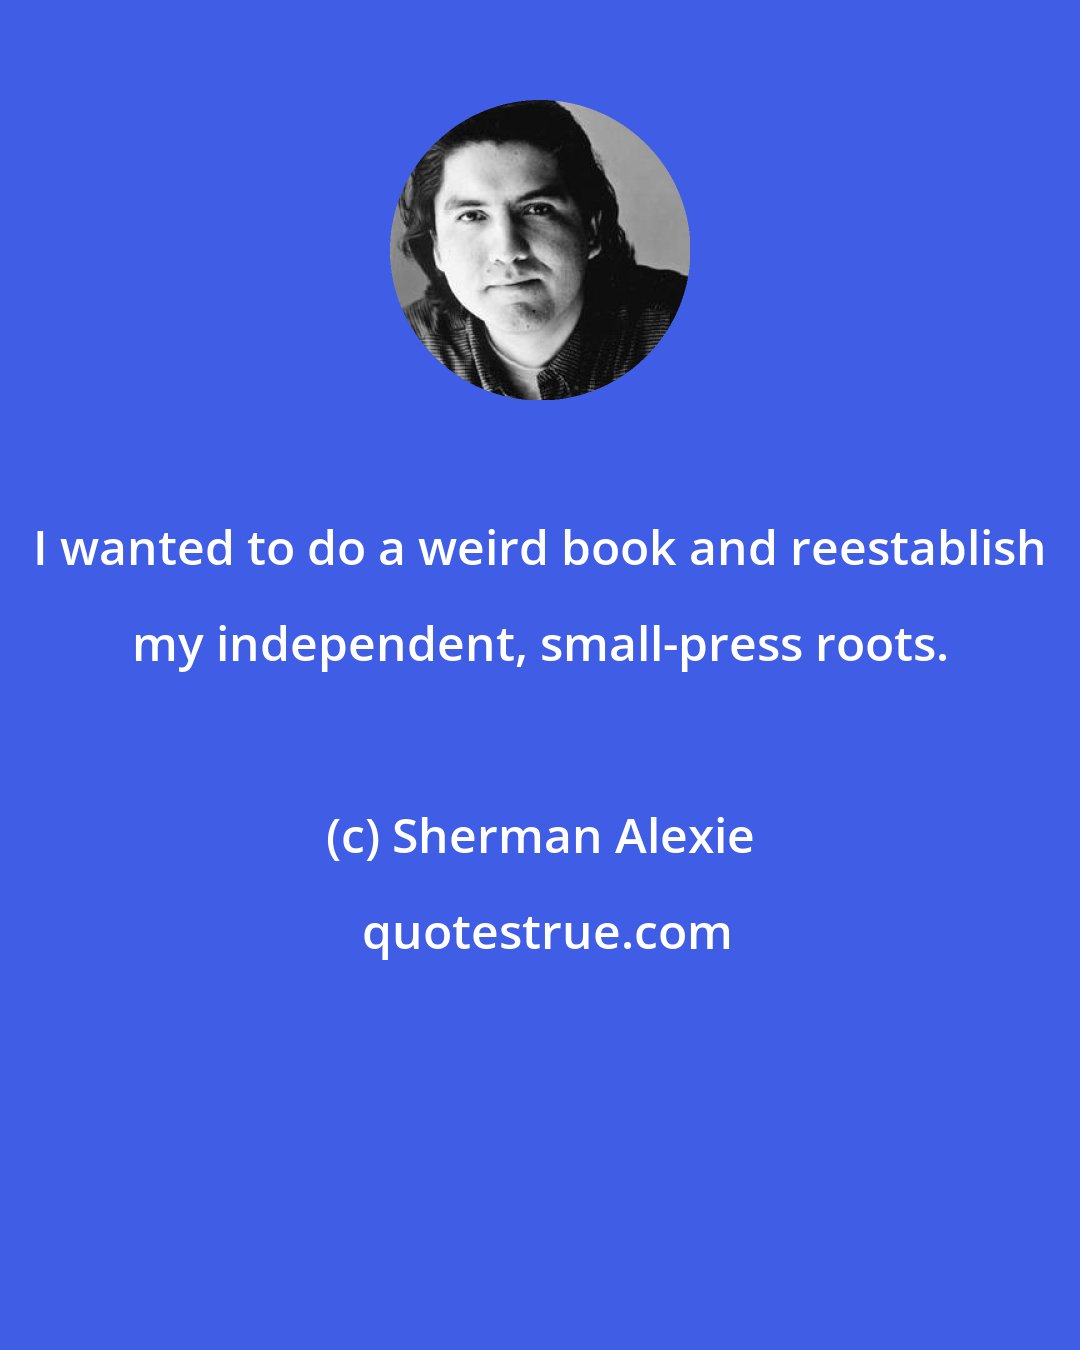 Sherman Alexie: I wanted to do a weird book and reestablish my independent, small-press roots.